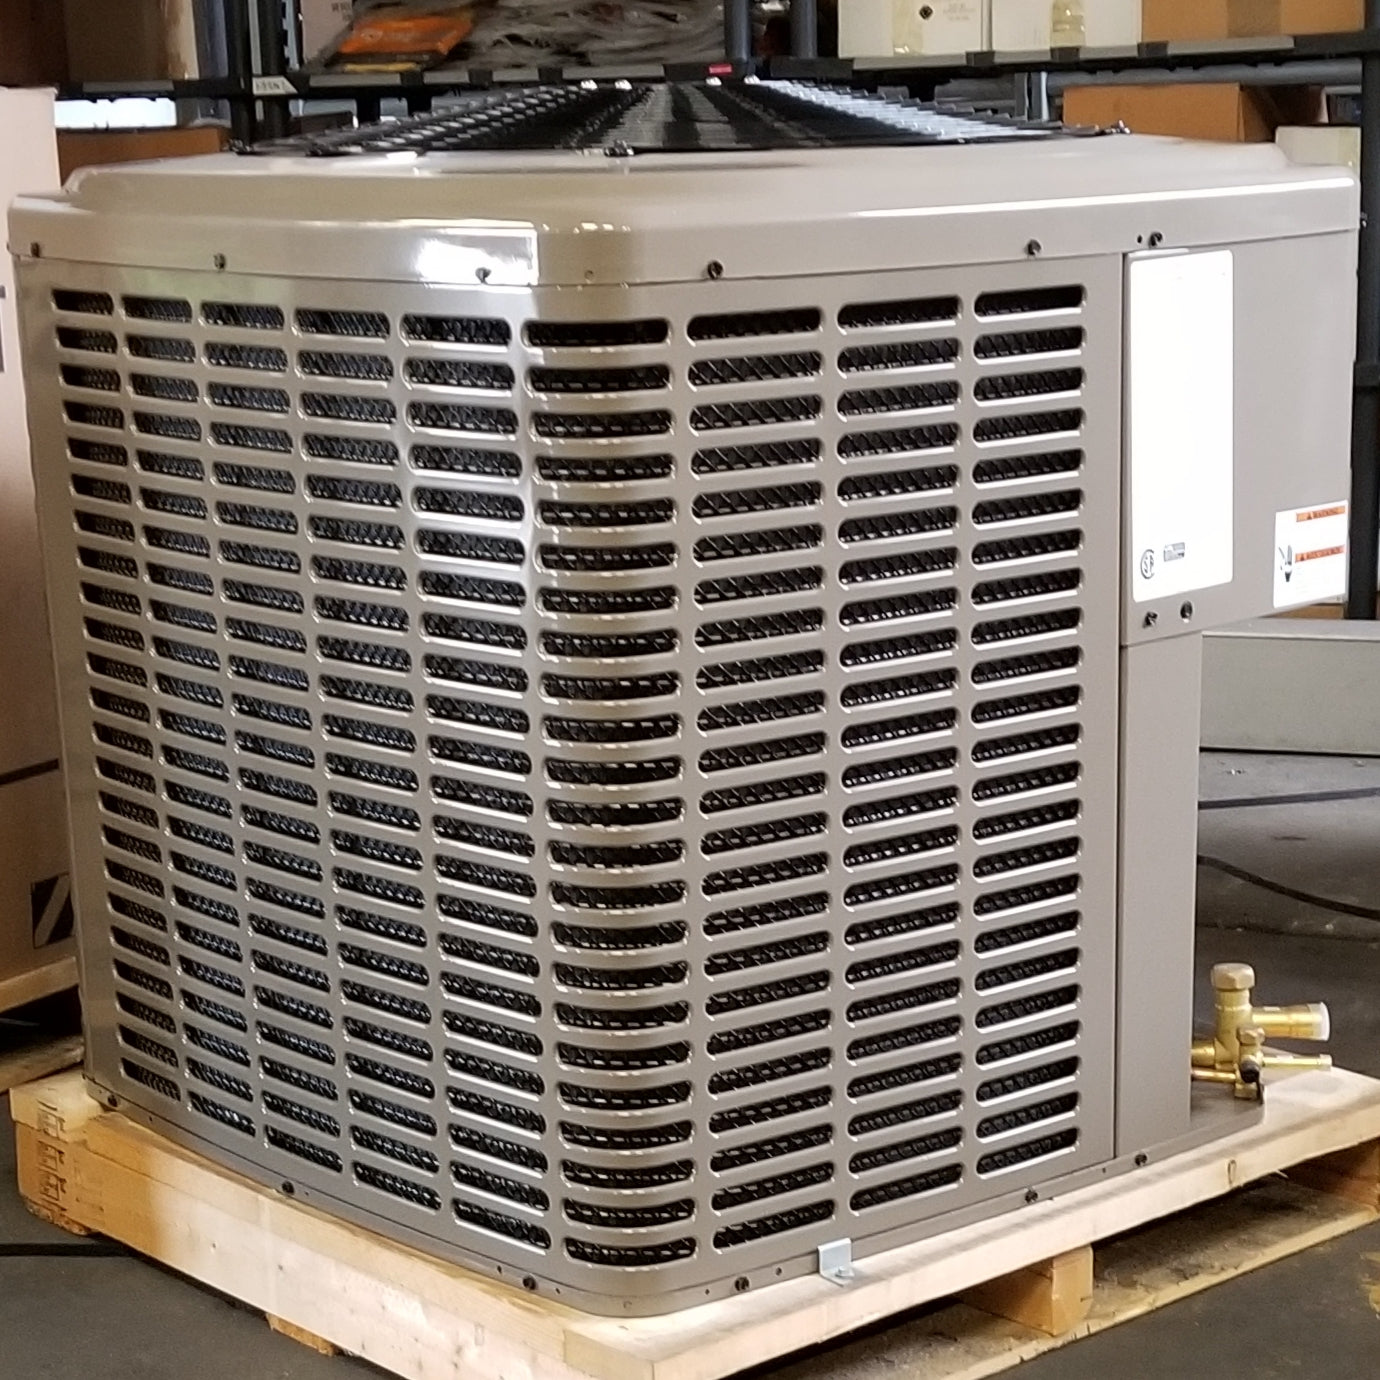 3 TON SPLIT SYSTEM AIR CONDITIONER, 13 SEER 460/60/3 R-410A